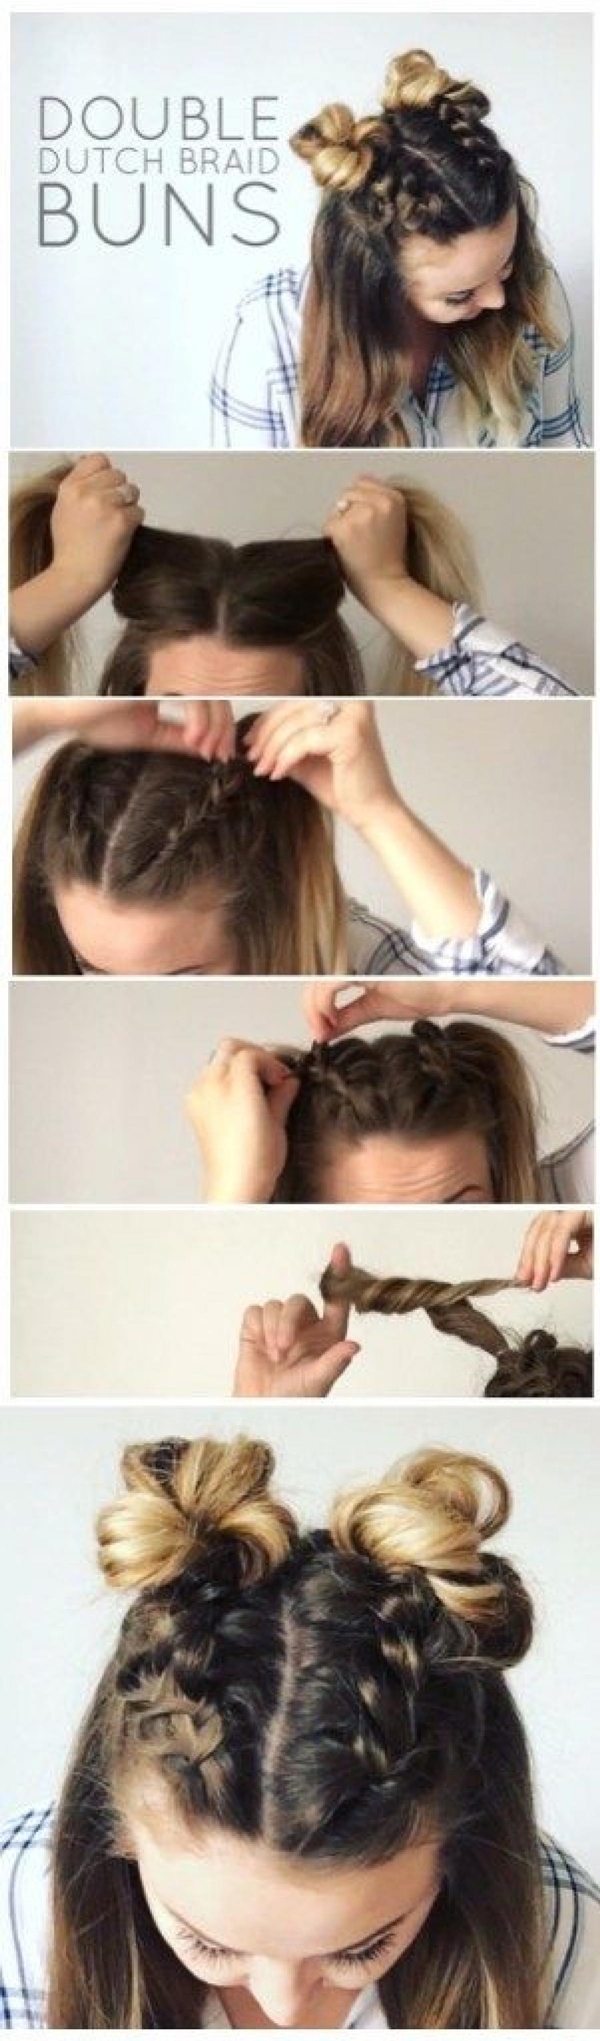 quick-easy-back-school-to-hairstyle-long-hair